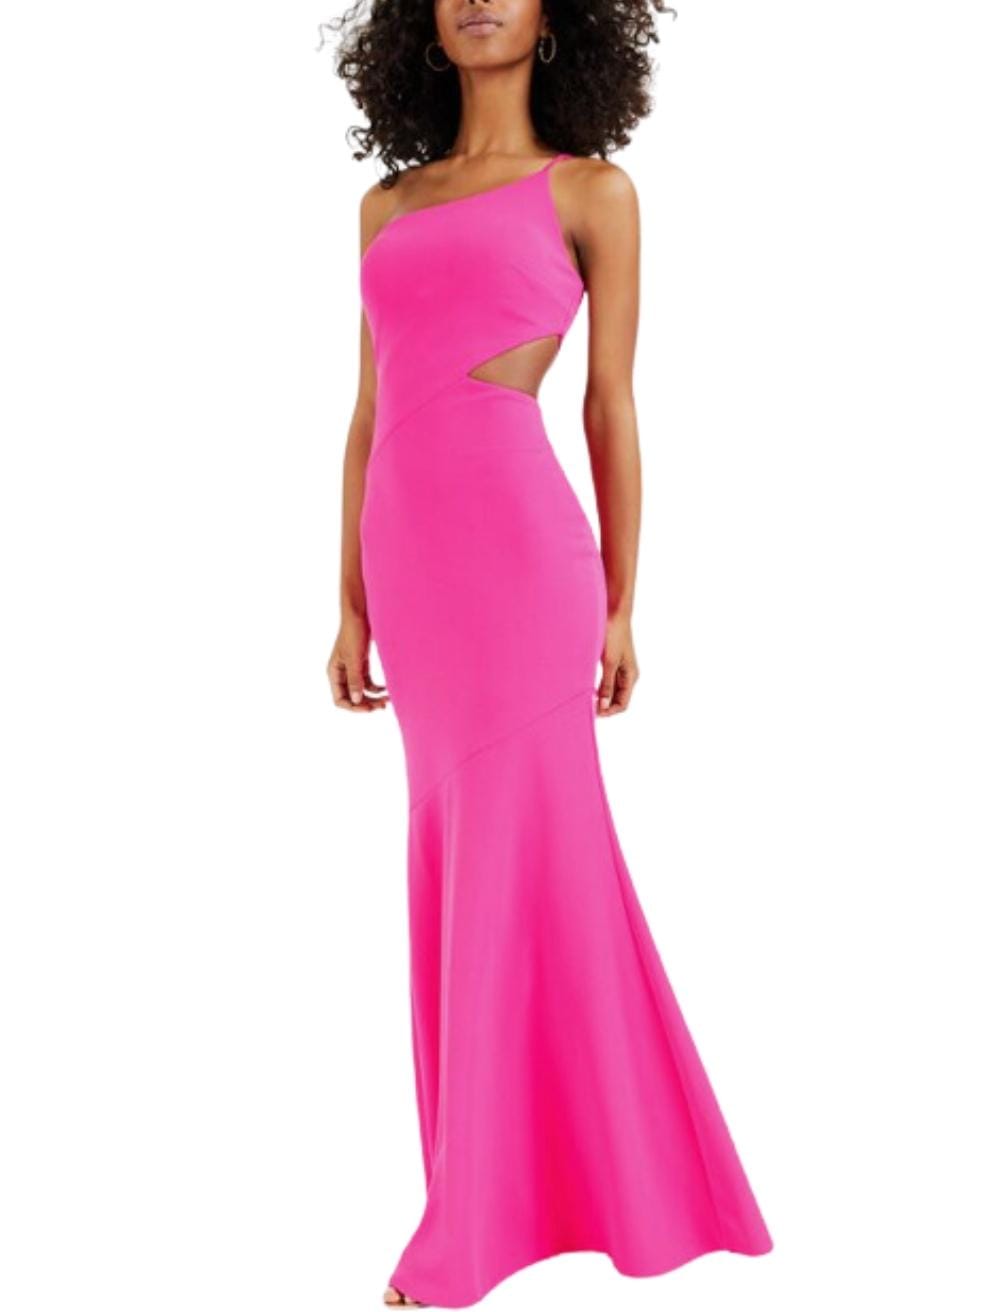 One-Shoulder Side-Cutout Gown